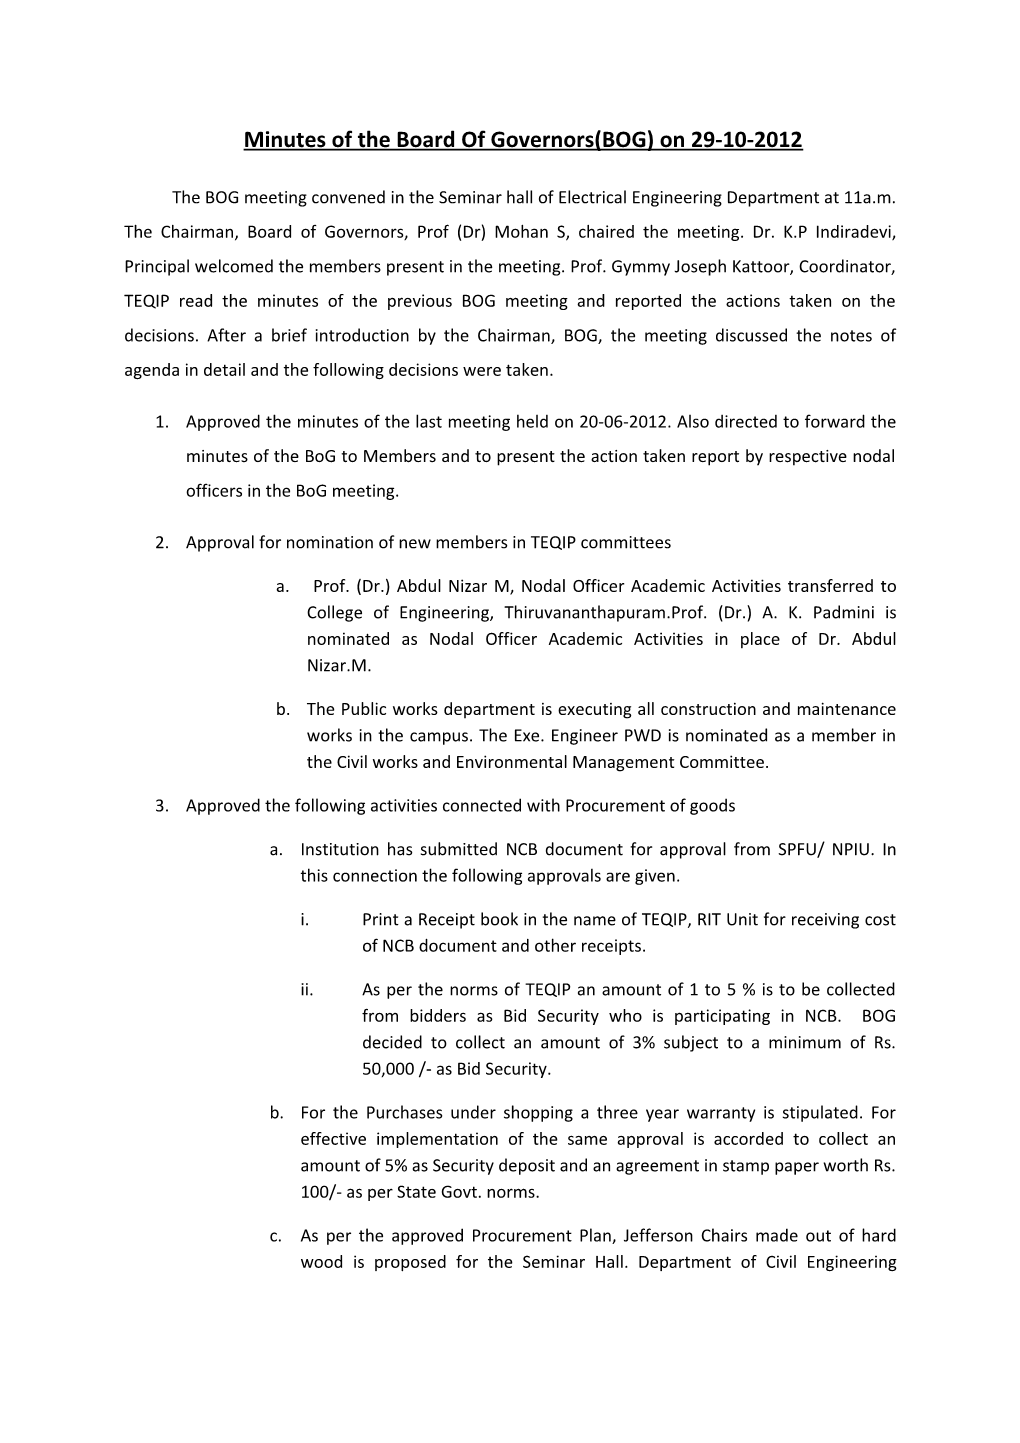 Minutes of the Board of Governors(BOG) on 29-10-2012